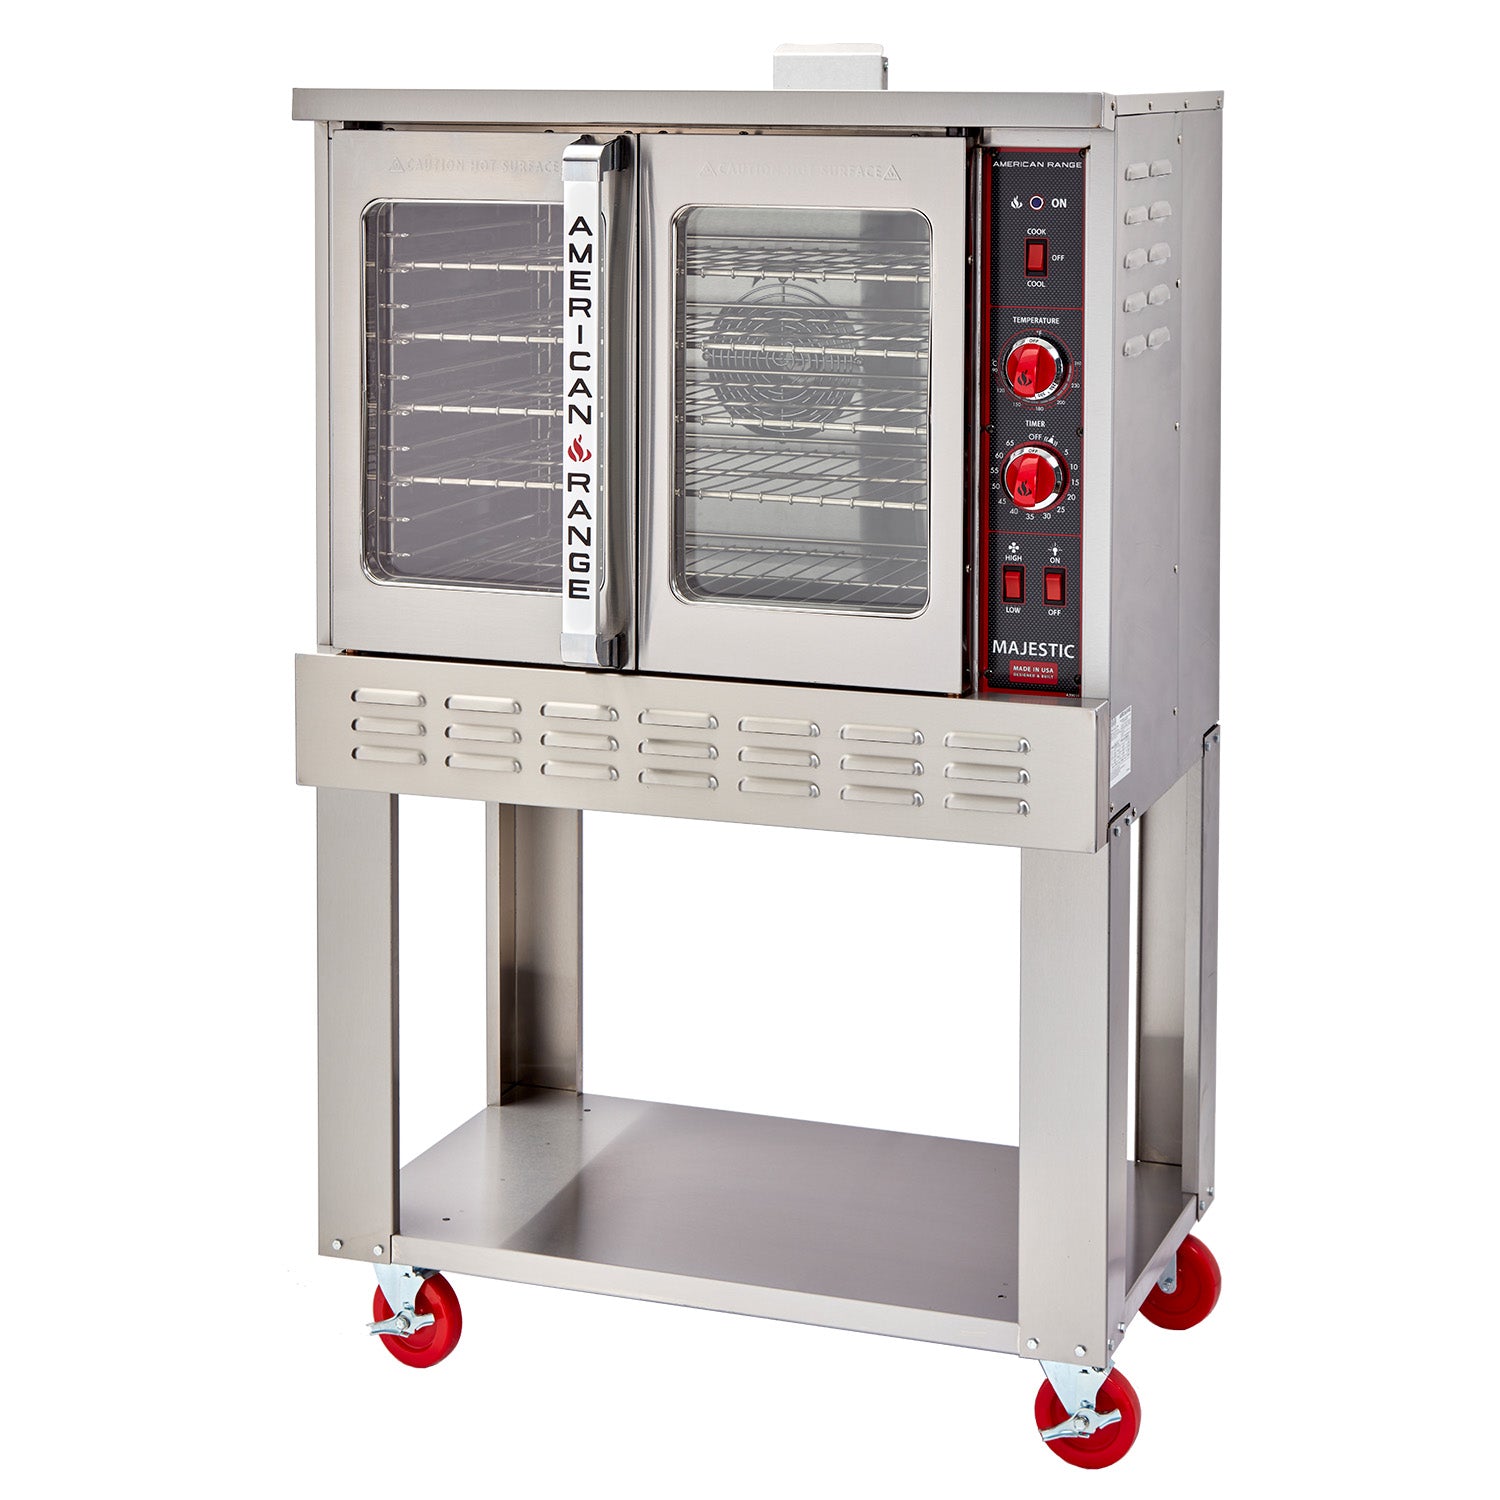 Majestic Convection Ovens Electric Standard